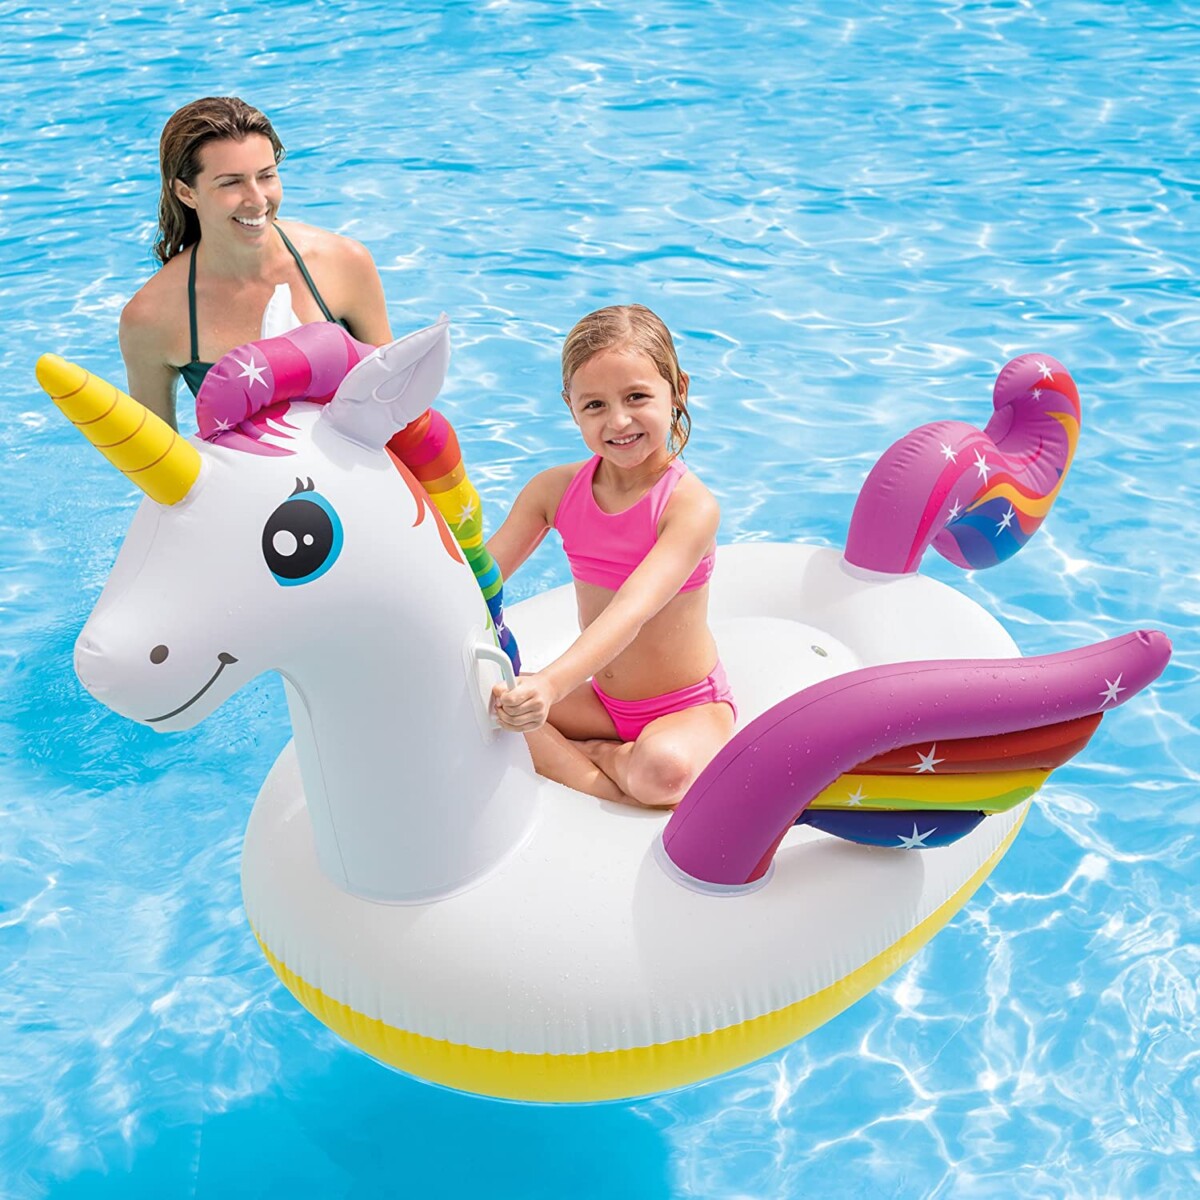 Alea's Deals Intex Unicorn Inflatable Ride-On Pool Float, 79" X 55" X 38" Up to 33% Off! Was $18.99!  